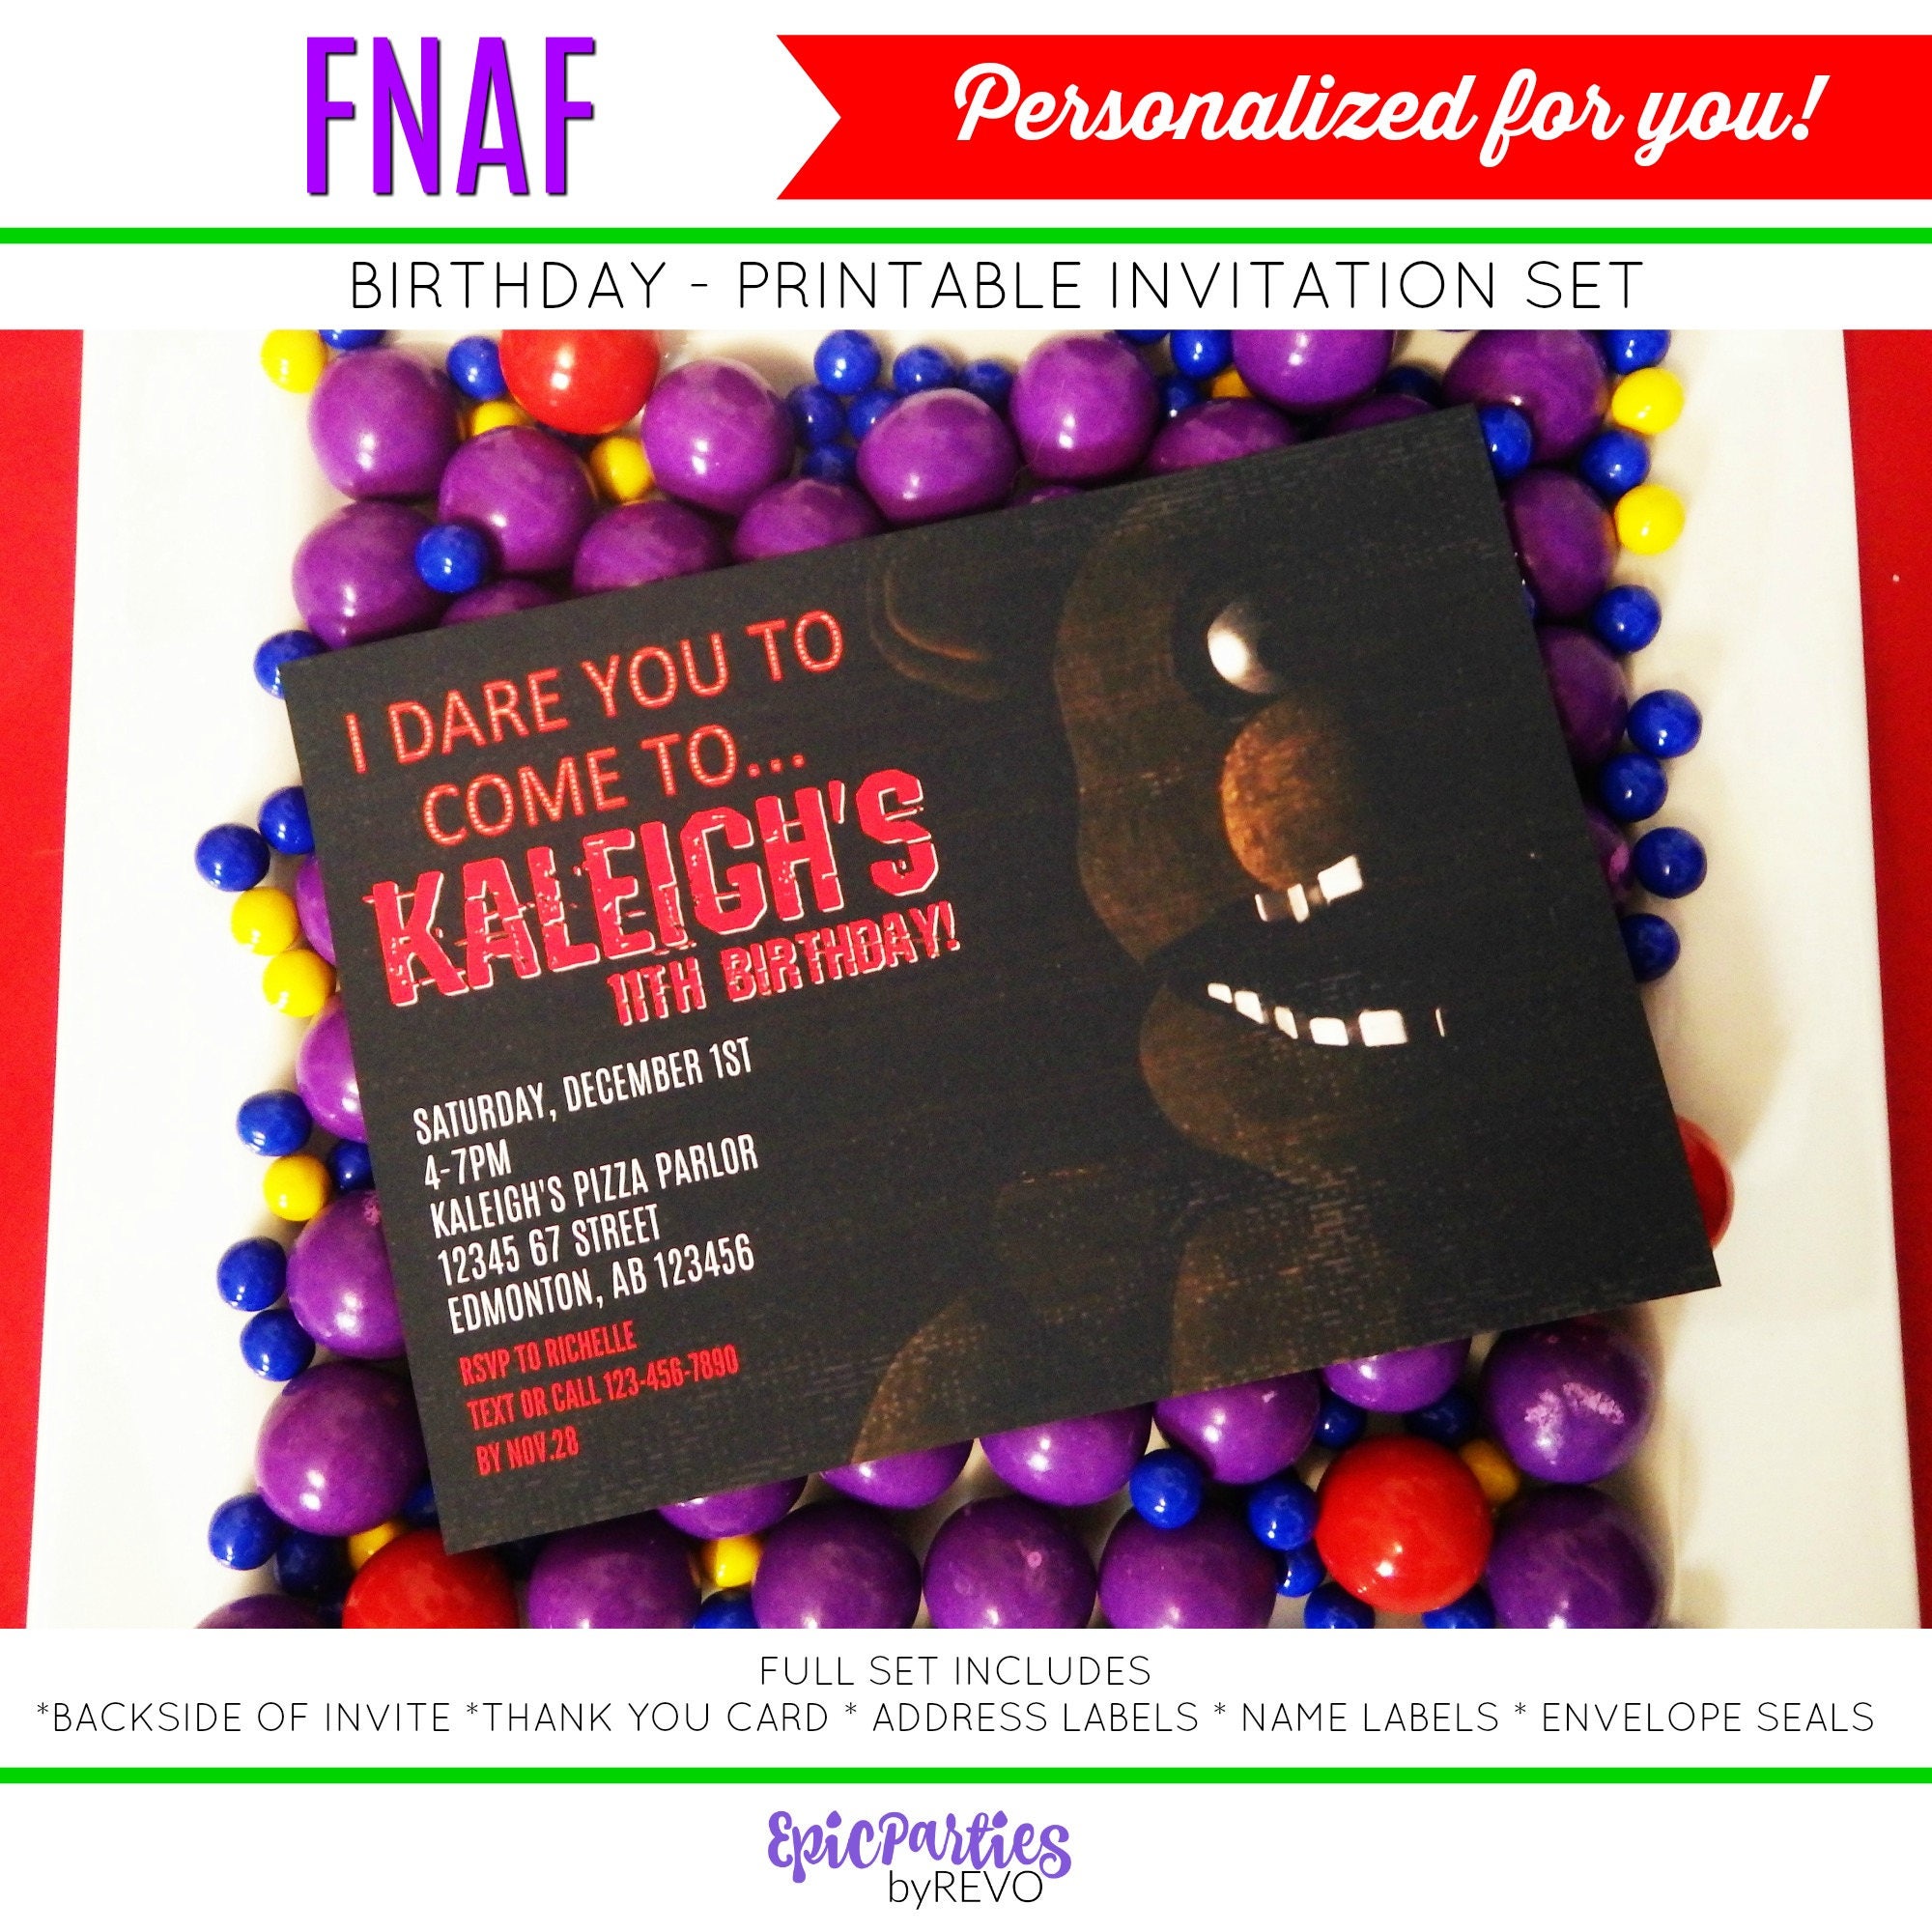 Five Nights at Freddy's Party Pack PLUS Invitation INSTANT DOWNLOAD  Printable